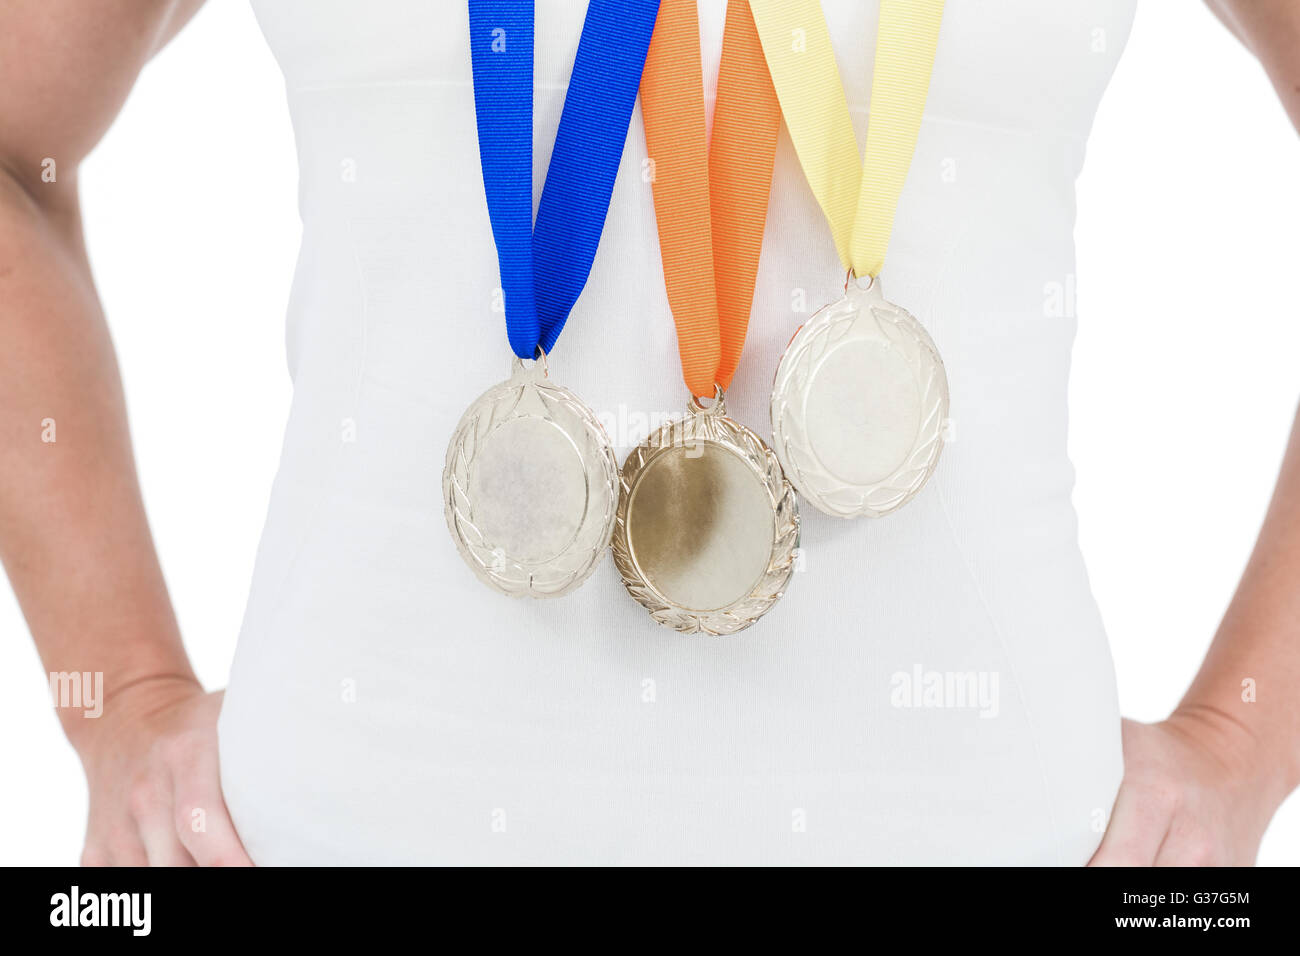 Female athlete wearing medals Stock Photo